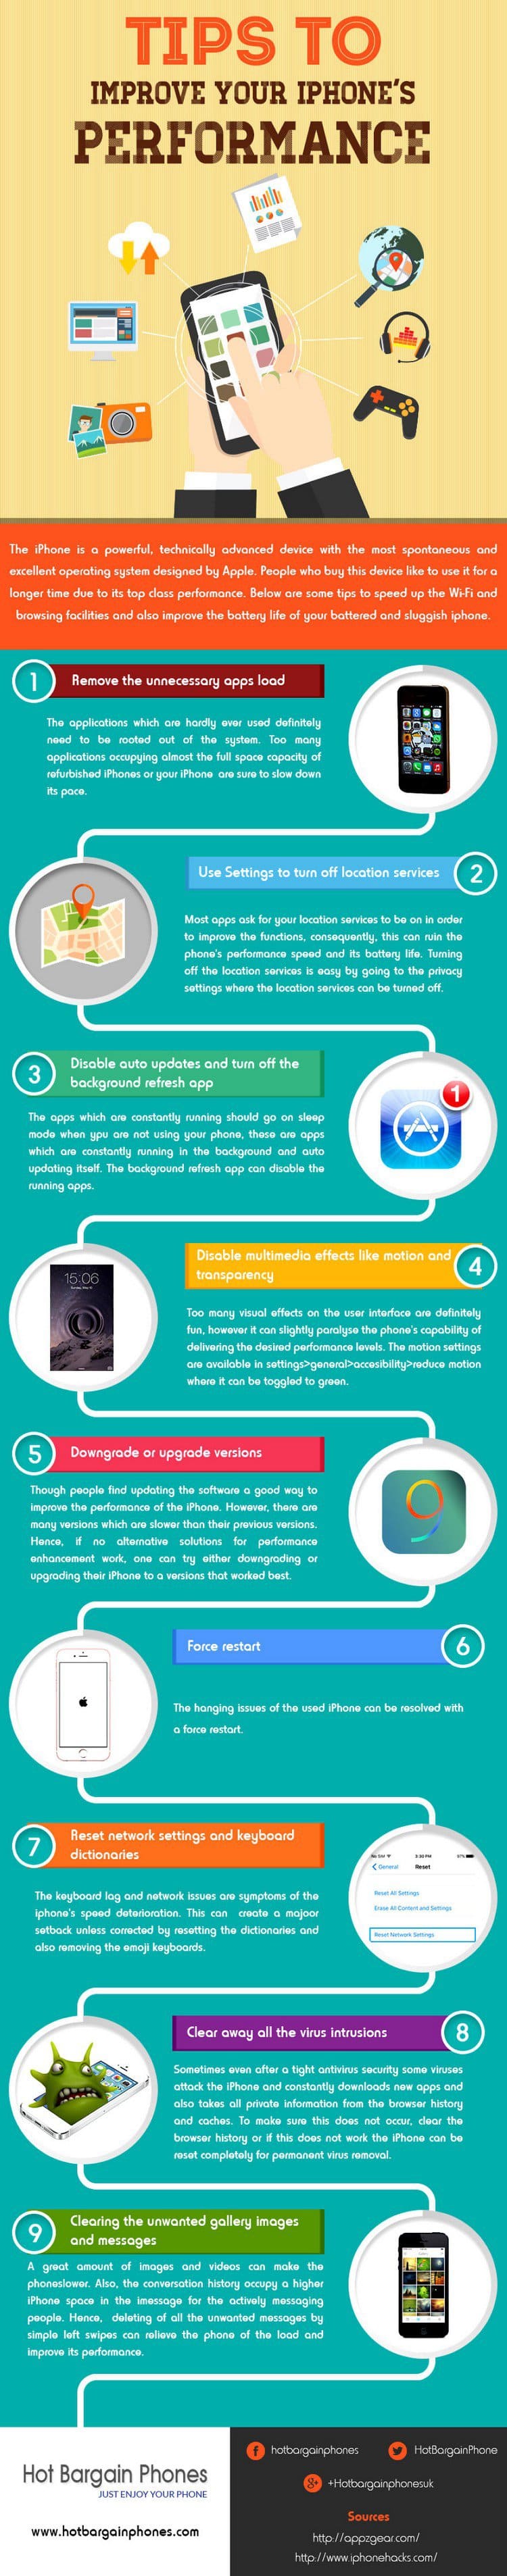 iphone tips